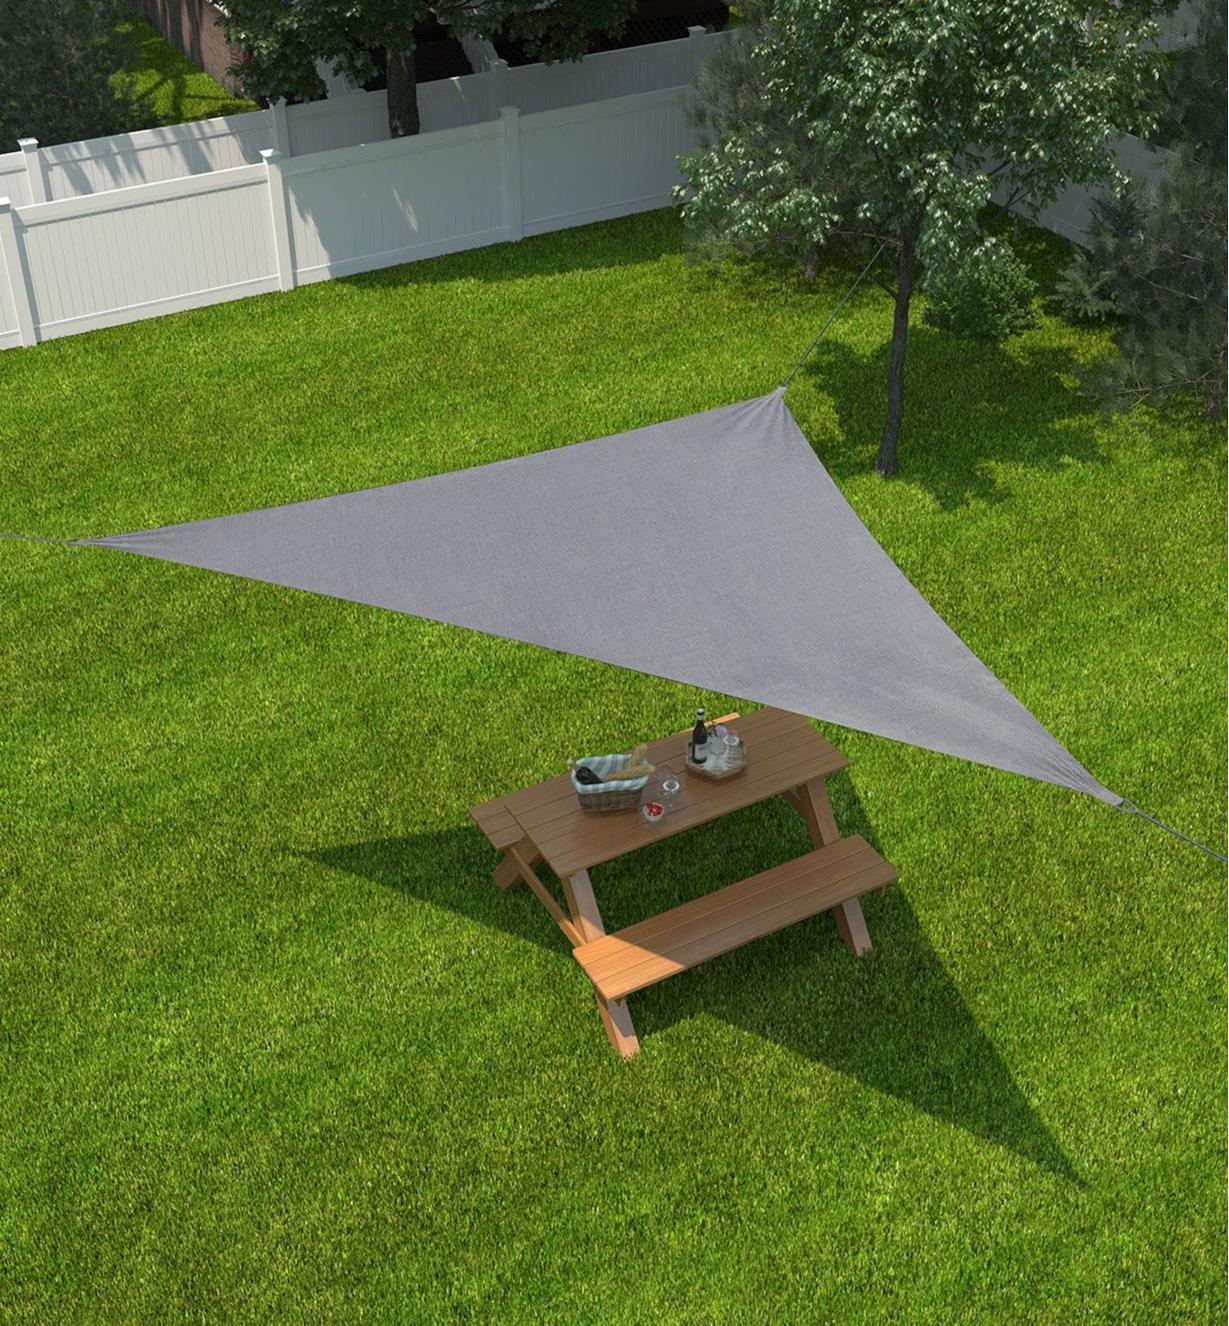 Overhead view of a triangle shade sail shading a picnic table